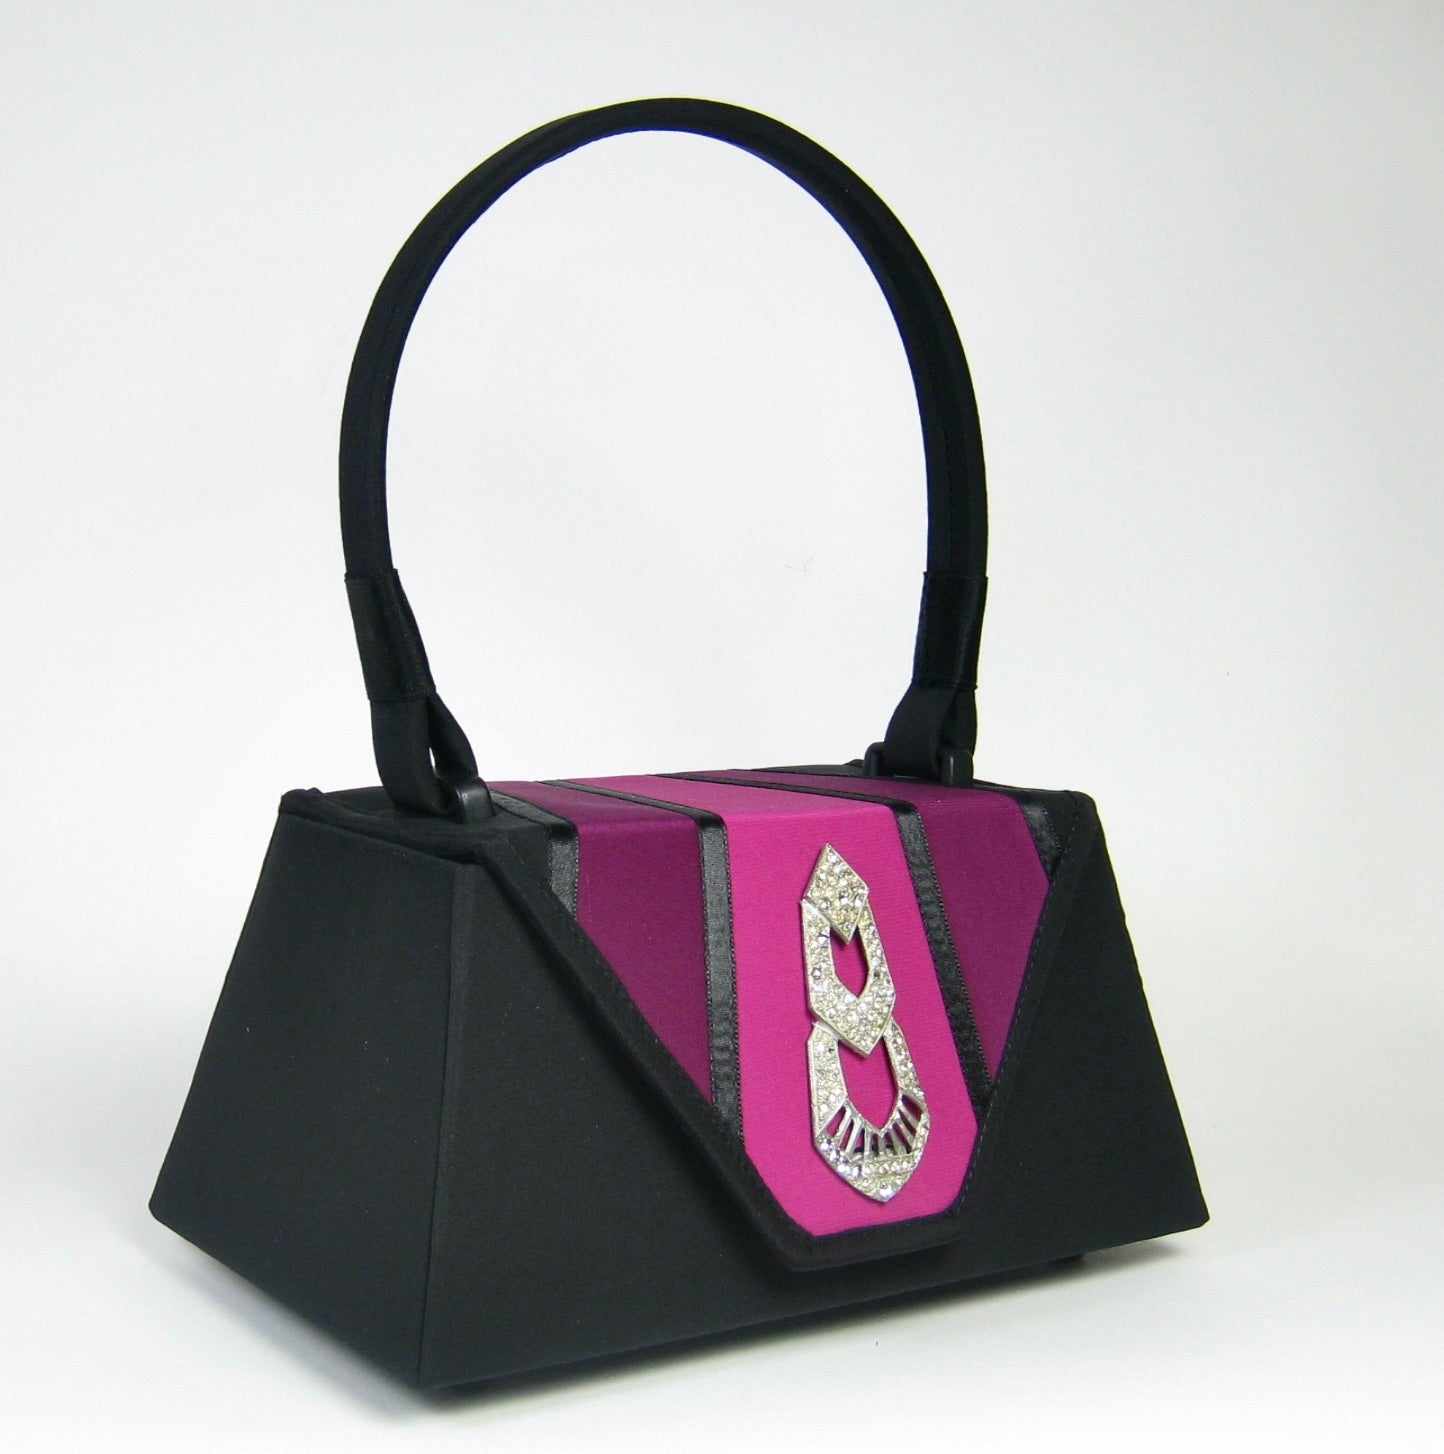 Deco Purse - Black with Hot Pink